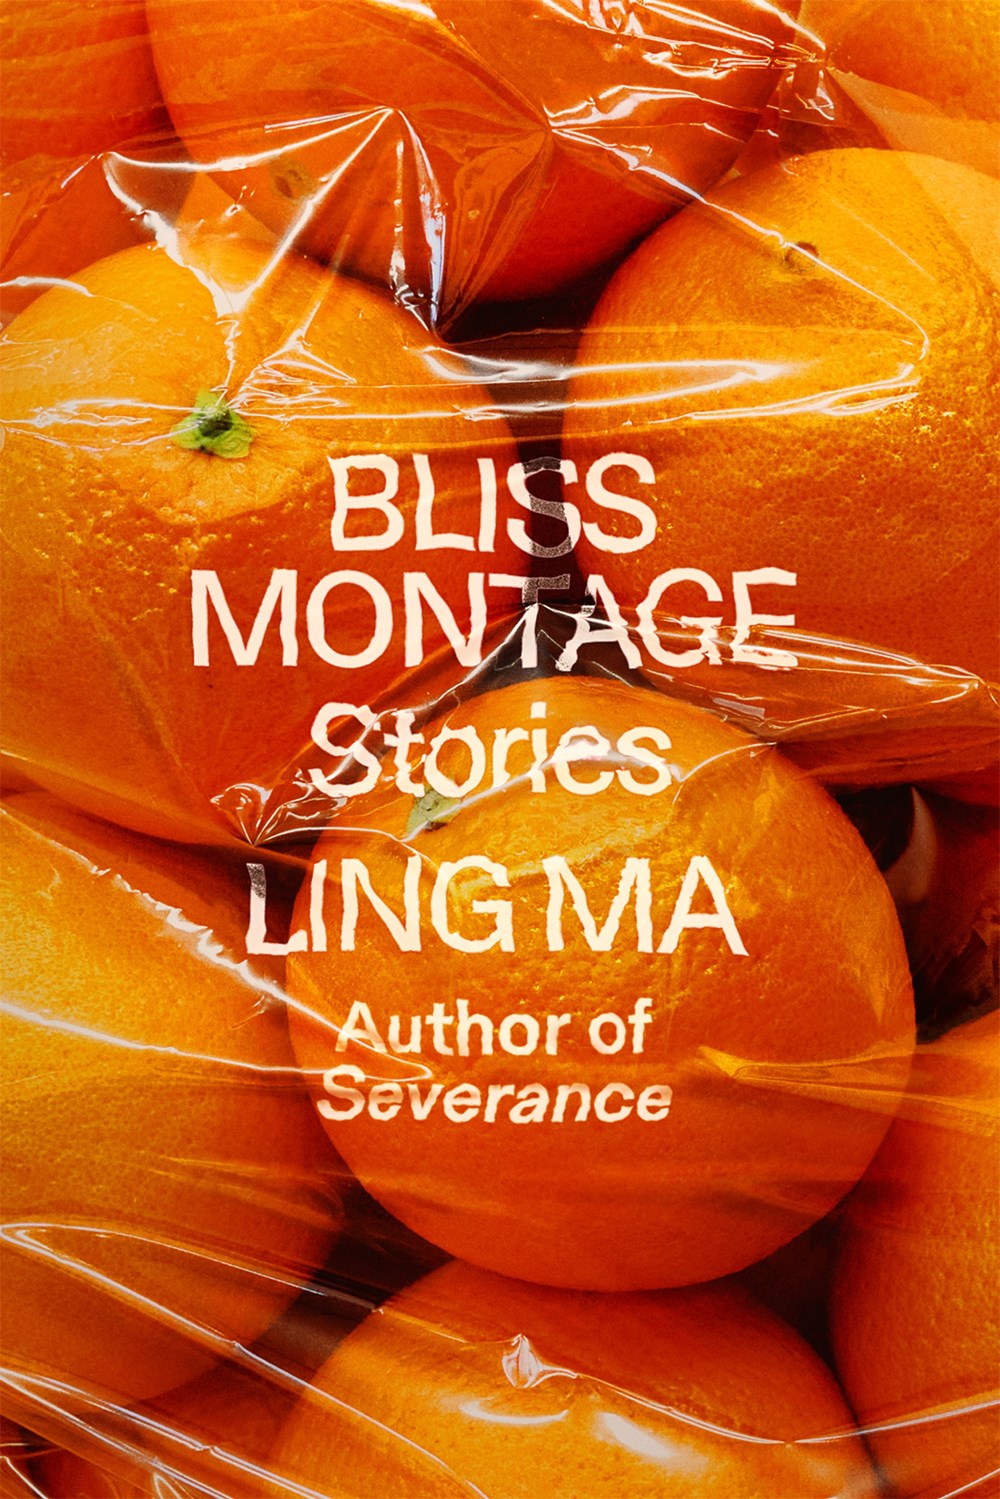 bliss montage book